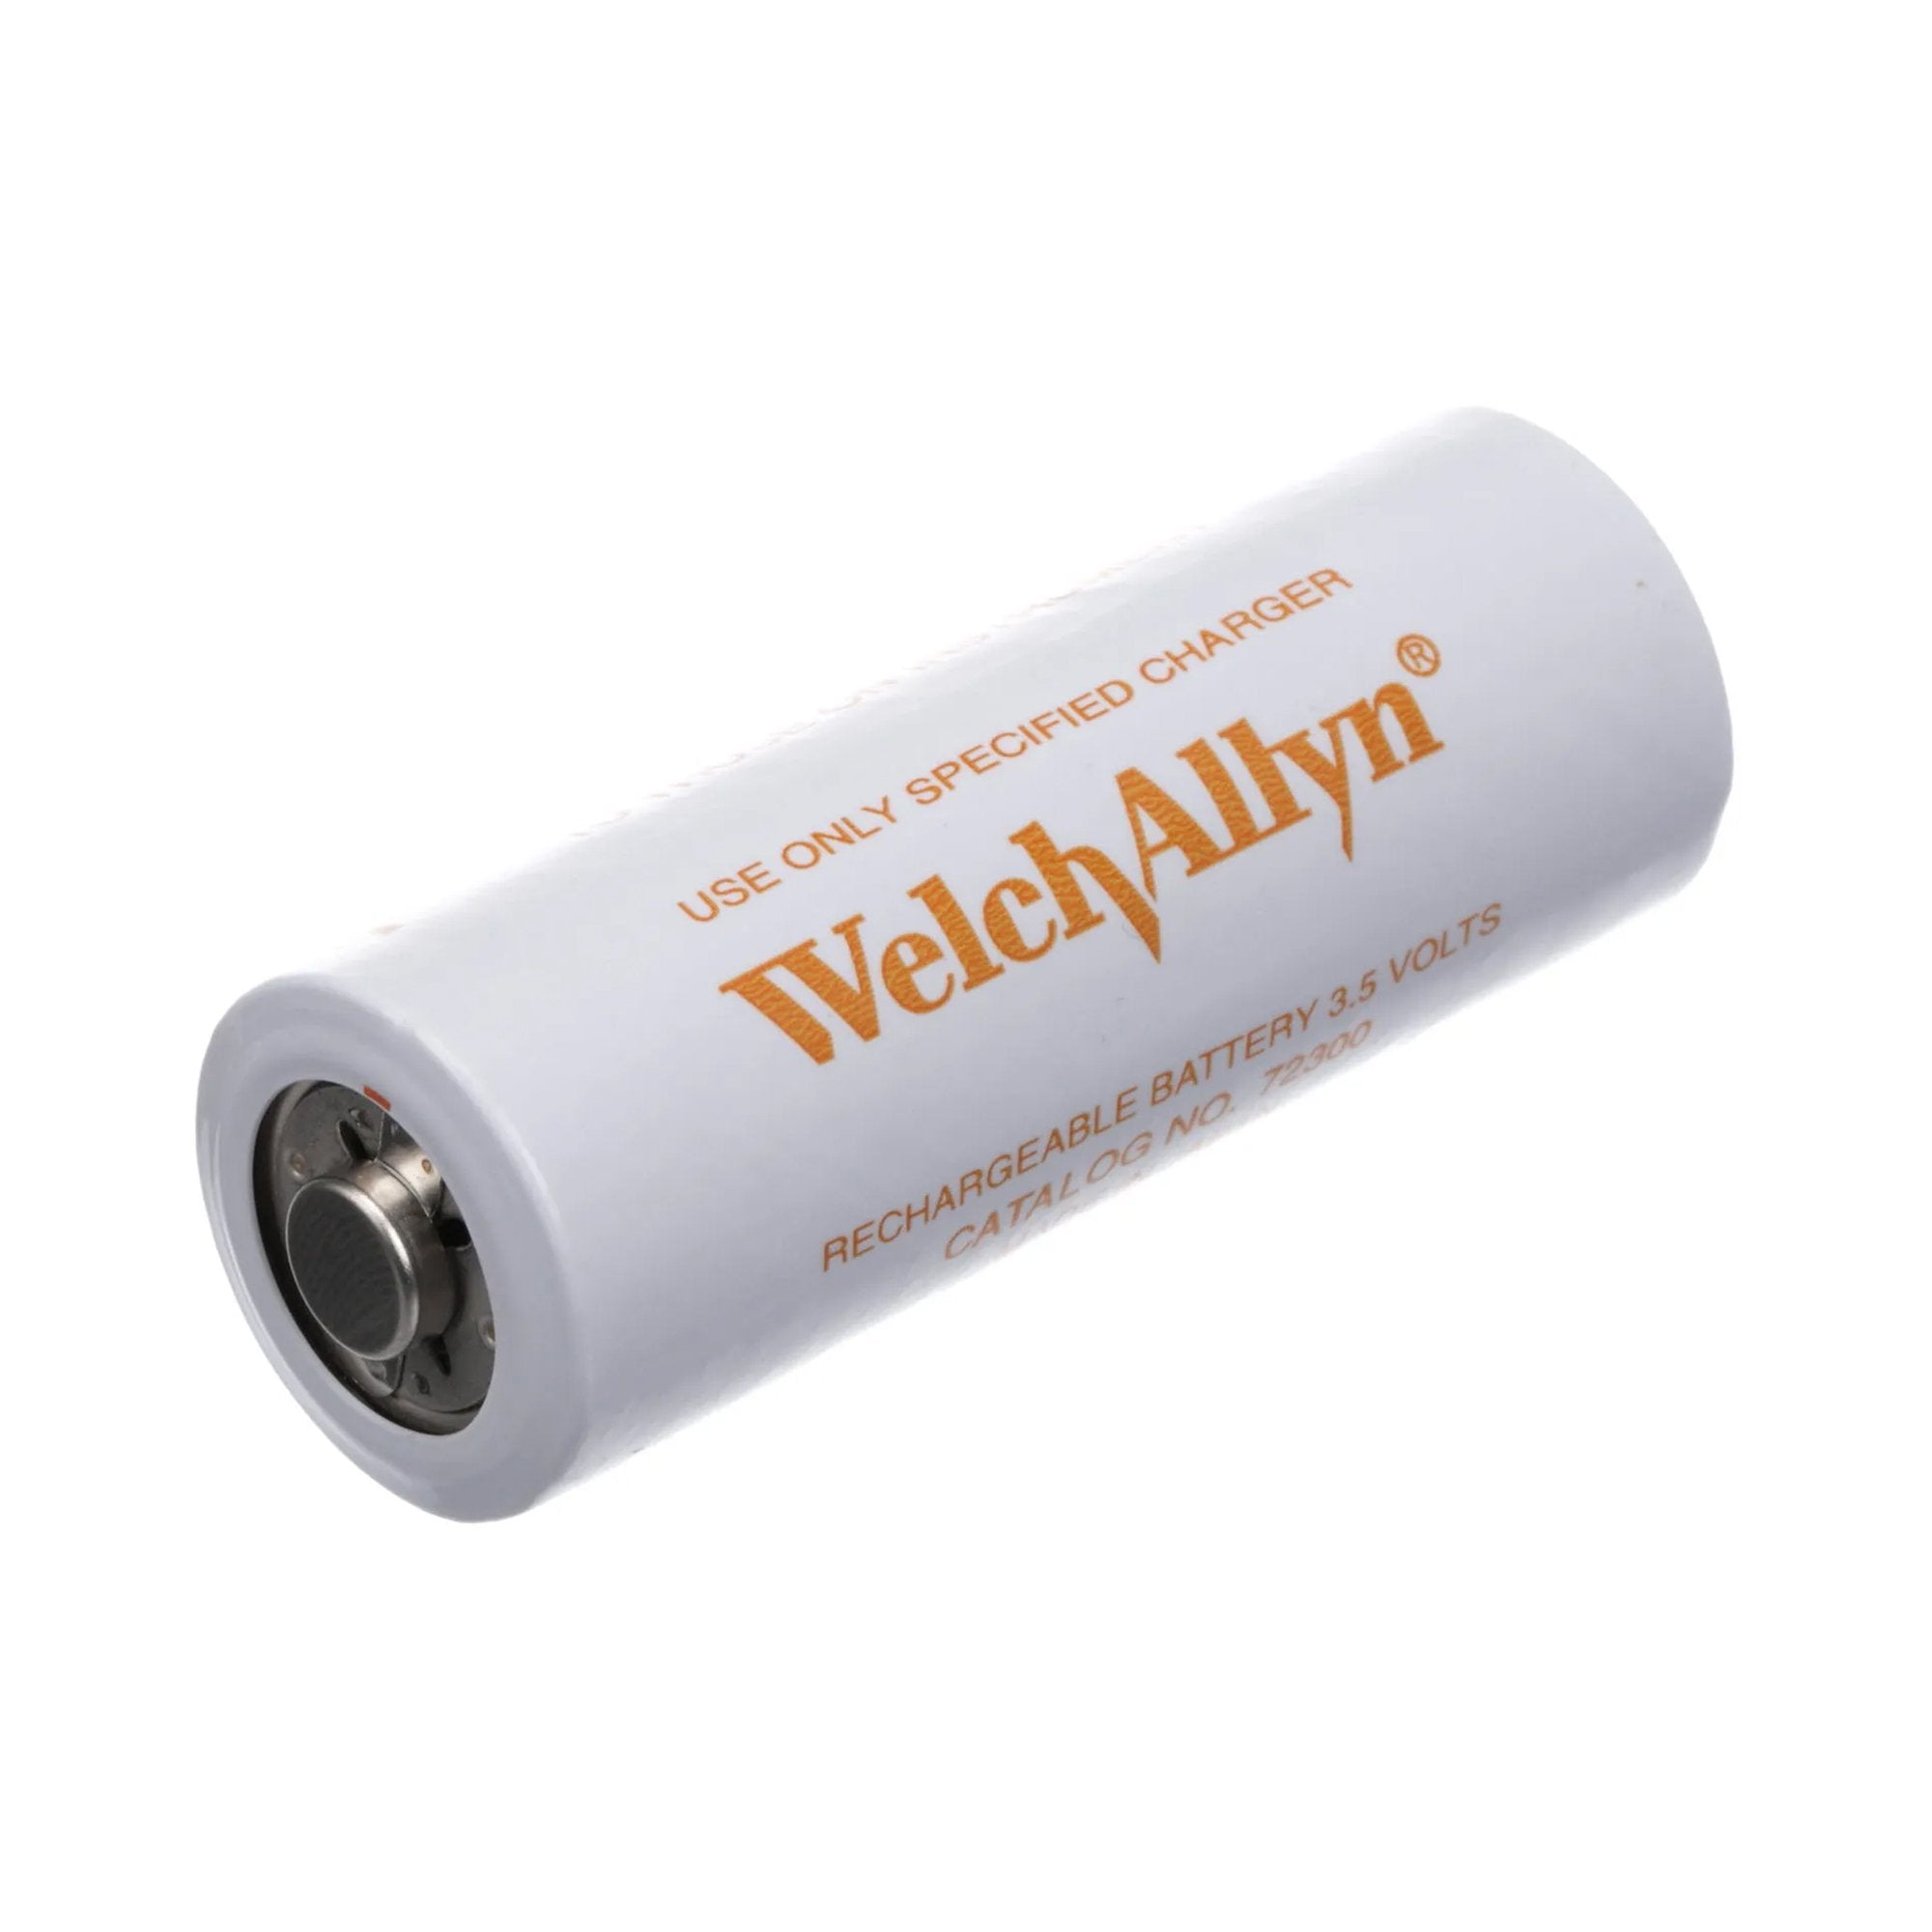 Welch Allyn® NiCd Diagnostic Battery for Scope Handles - 71000A / 71020A / 71020C / 71055C